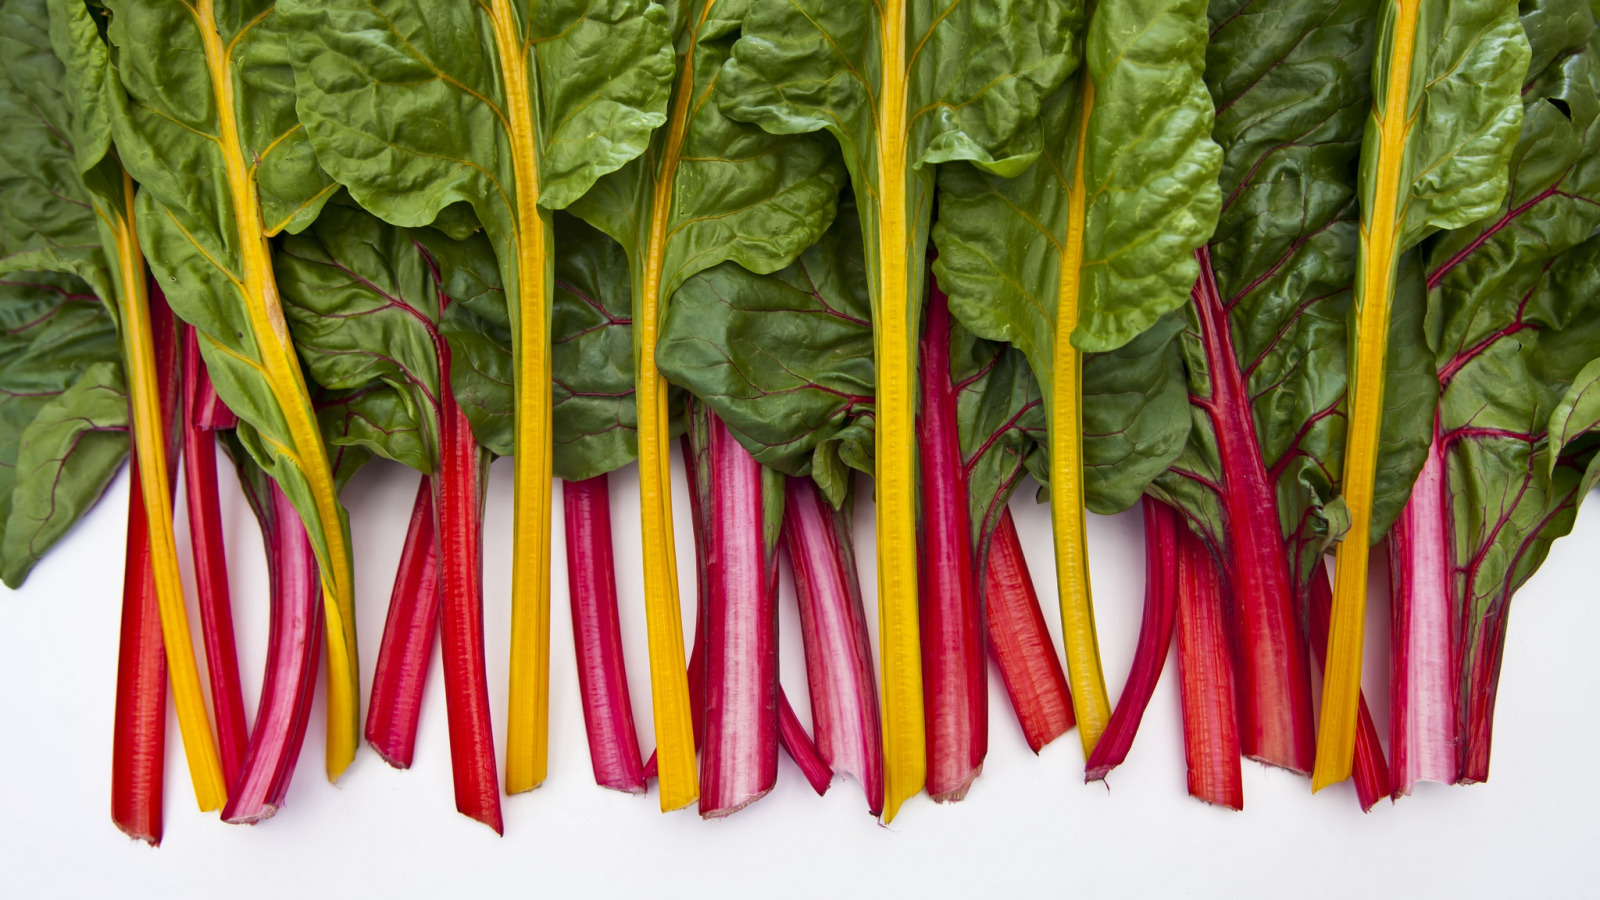 Swiss Chard: Nutrition, Health Benefits, and How to Cook It